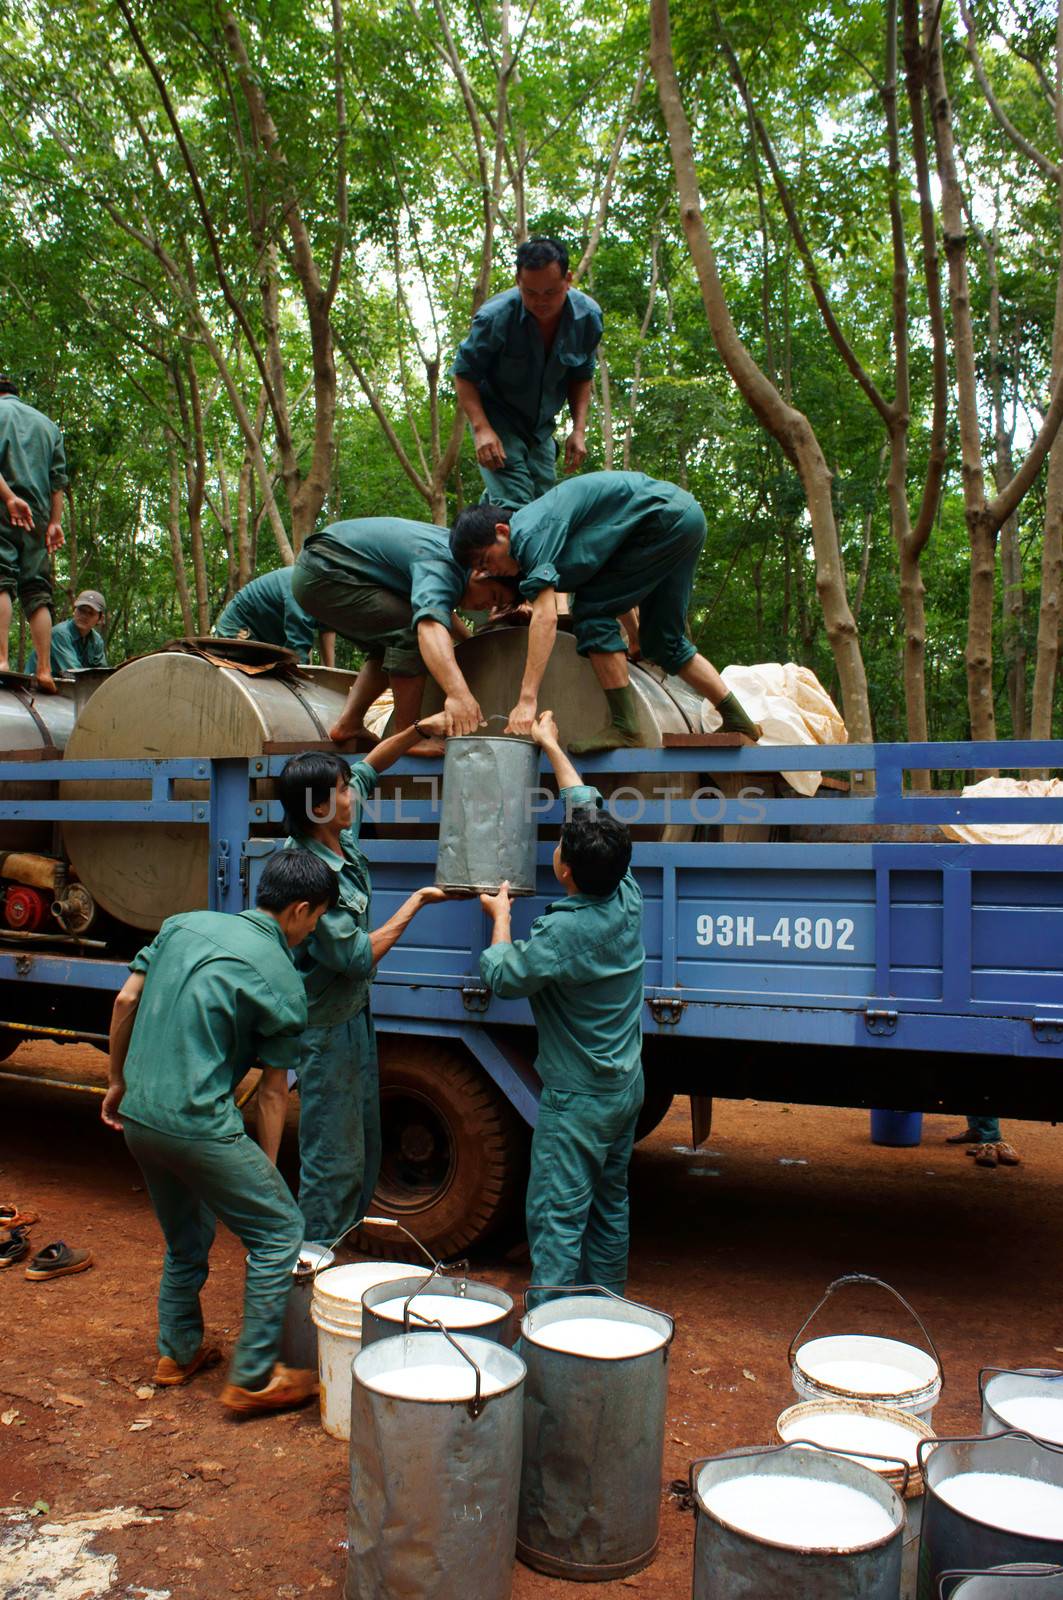 After weigh rubber latex, they move them to vehicle, transport to factory. Binh Phuoc,Viet Nam-  May 9, 2013